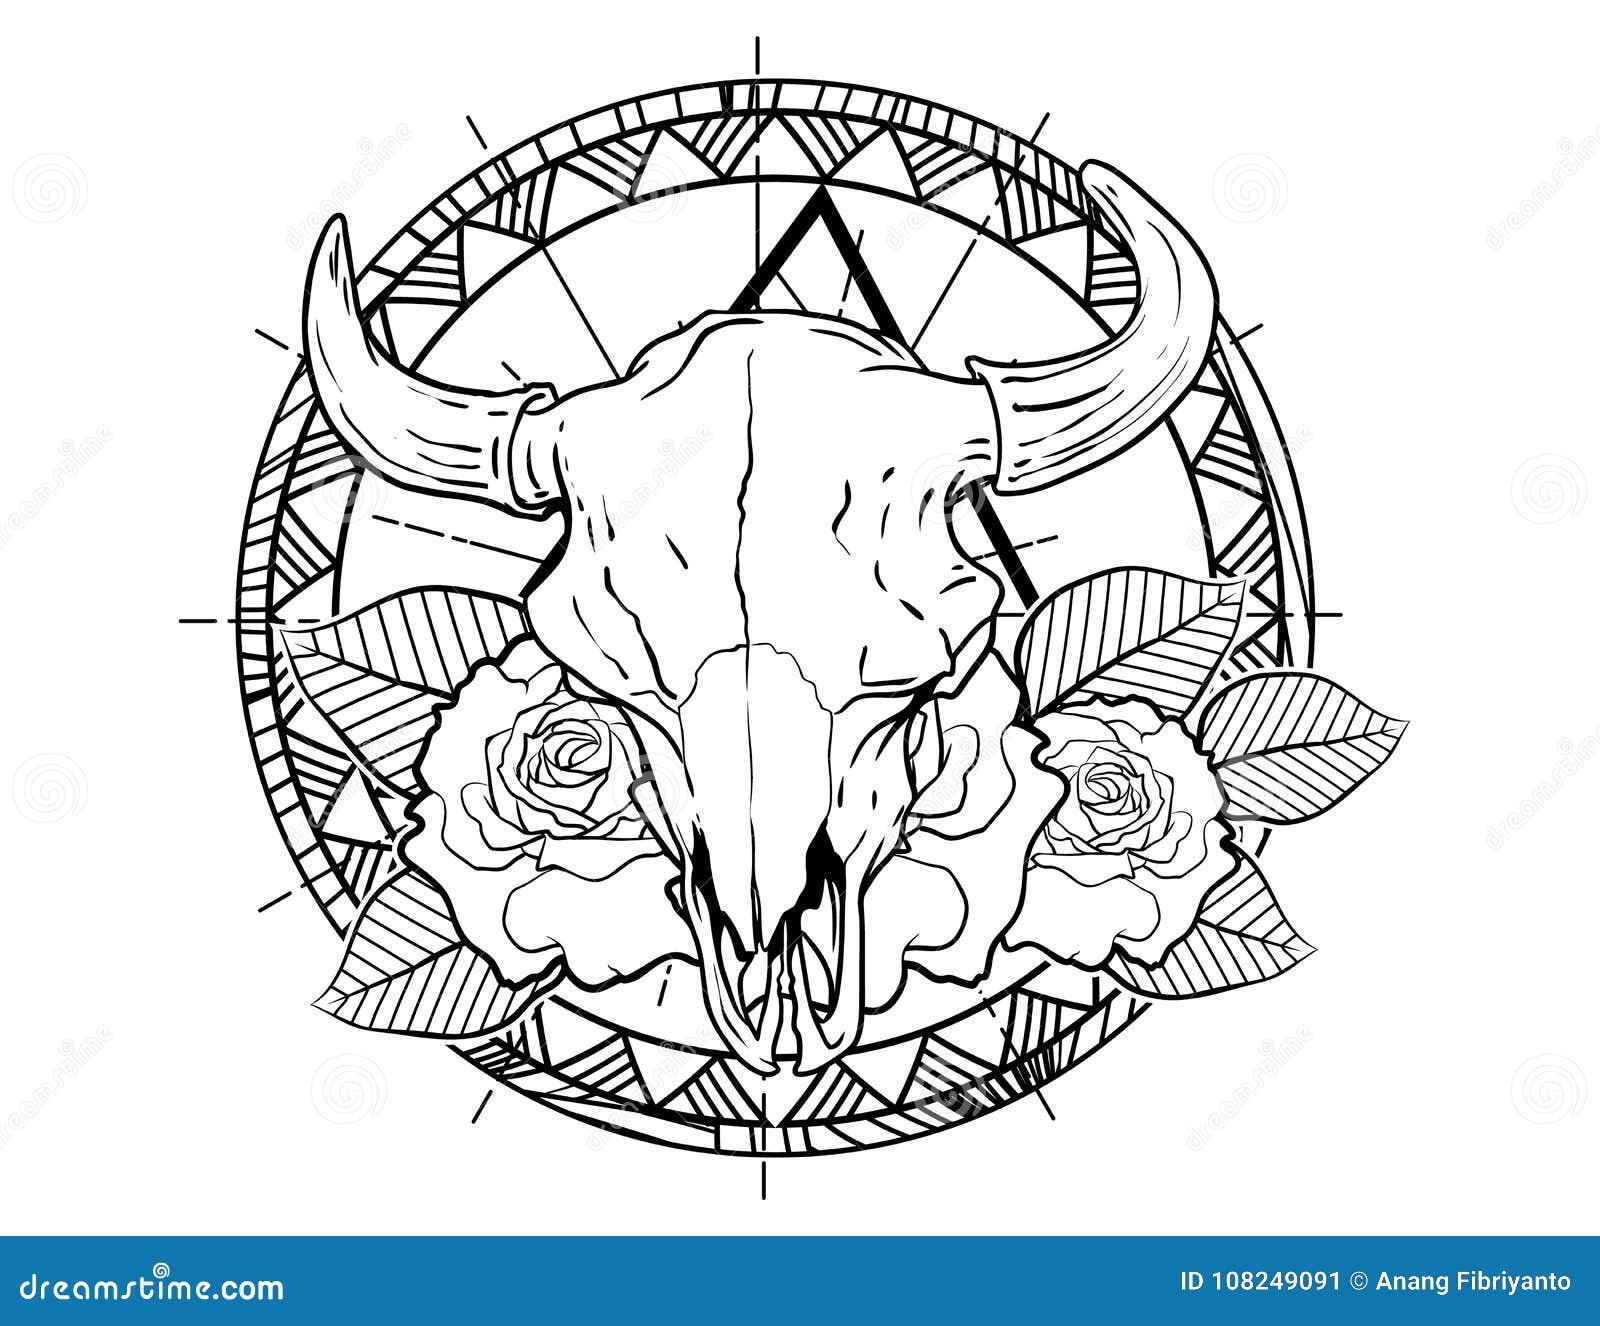 Bull Skull Tattoo Sketch with Roses and Leafes Vintage Neo Traditional  Tattoo Sketch Stock Vector - Illustration of retro, tattoo: 108249091